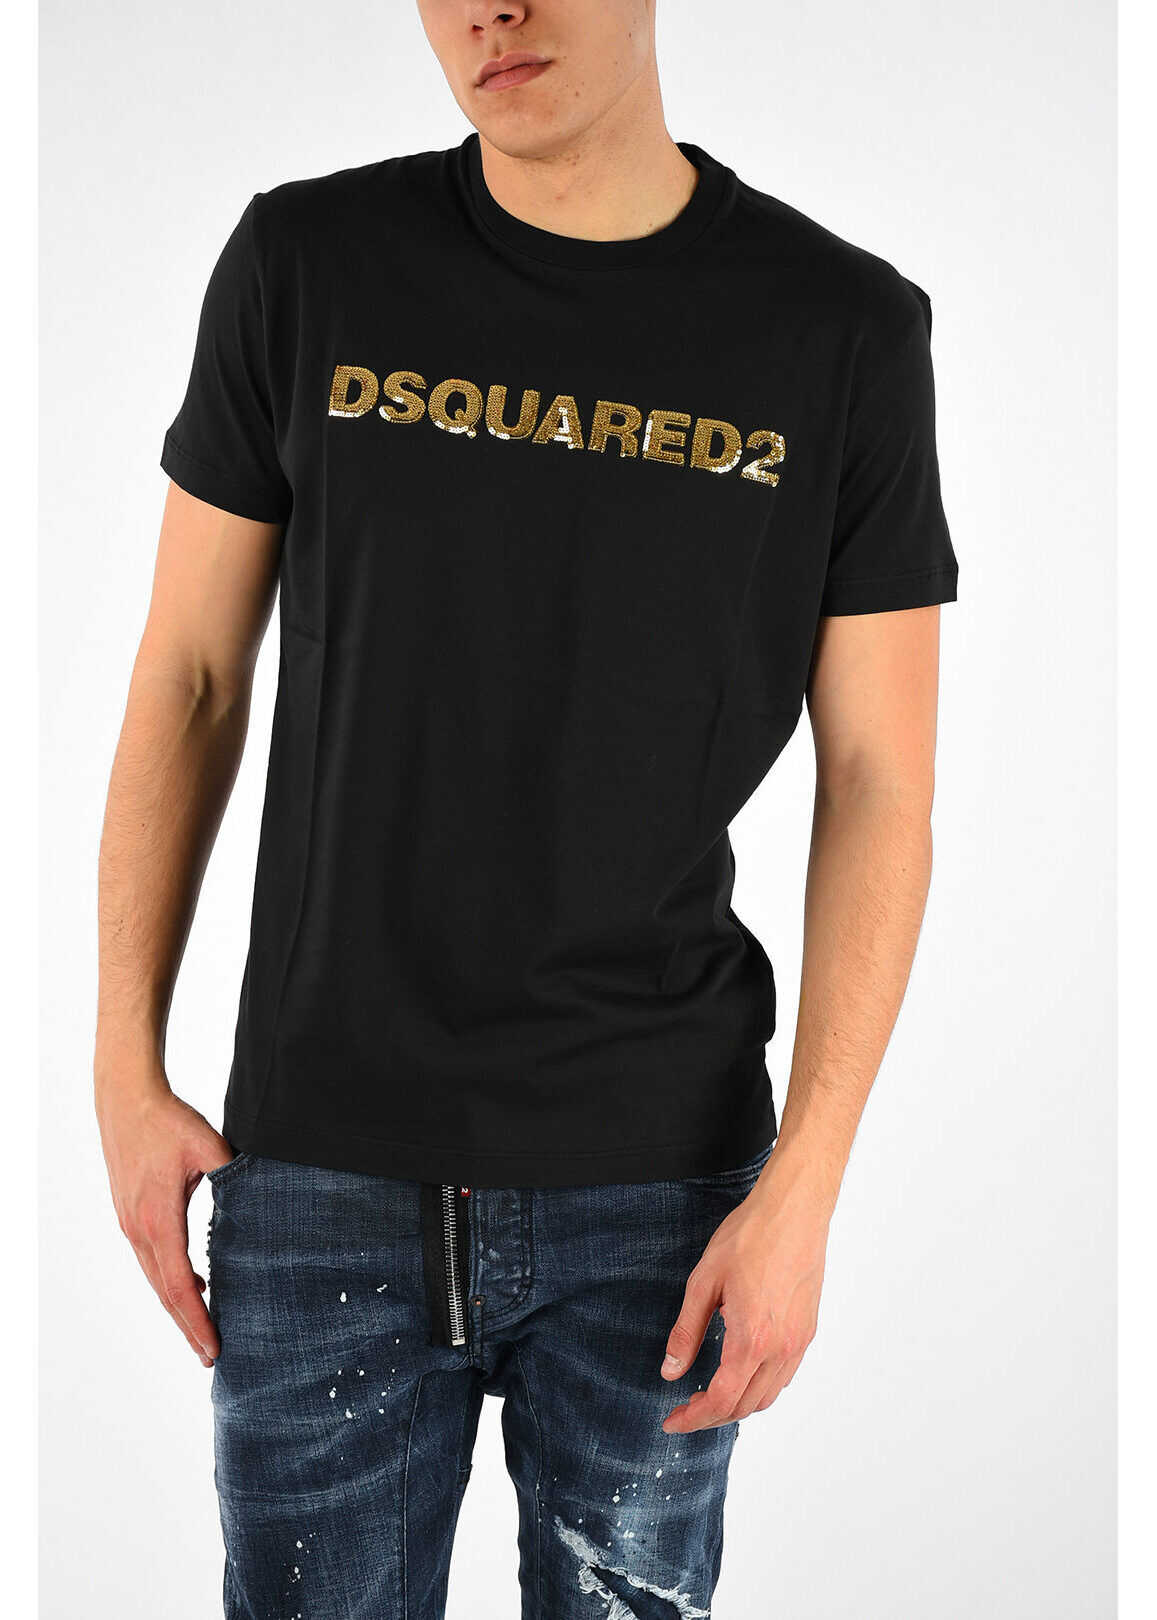 DSQUARED2 T-shirt LONG COOL FIT with Sequins BLACK